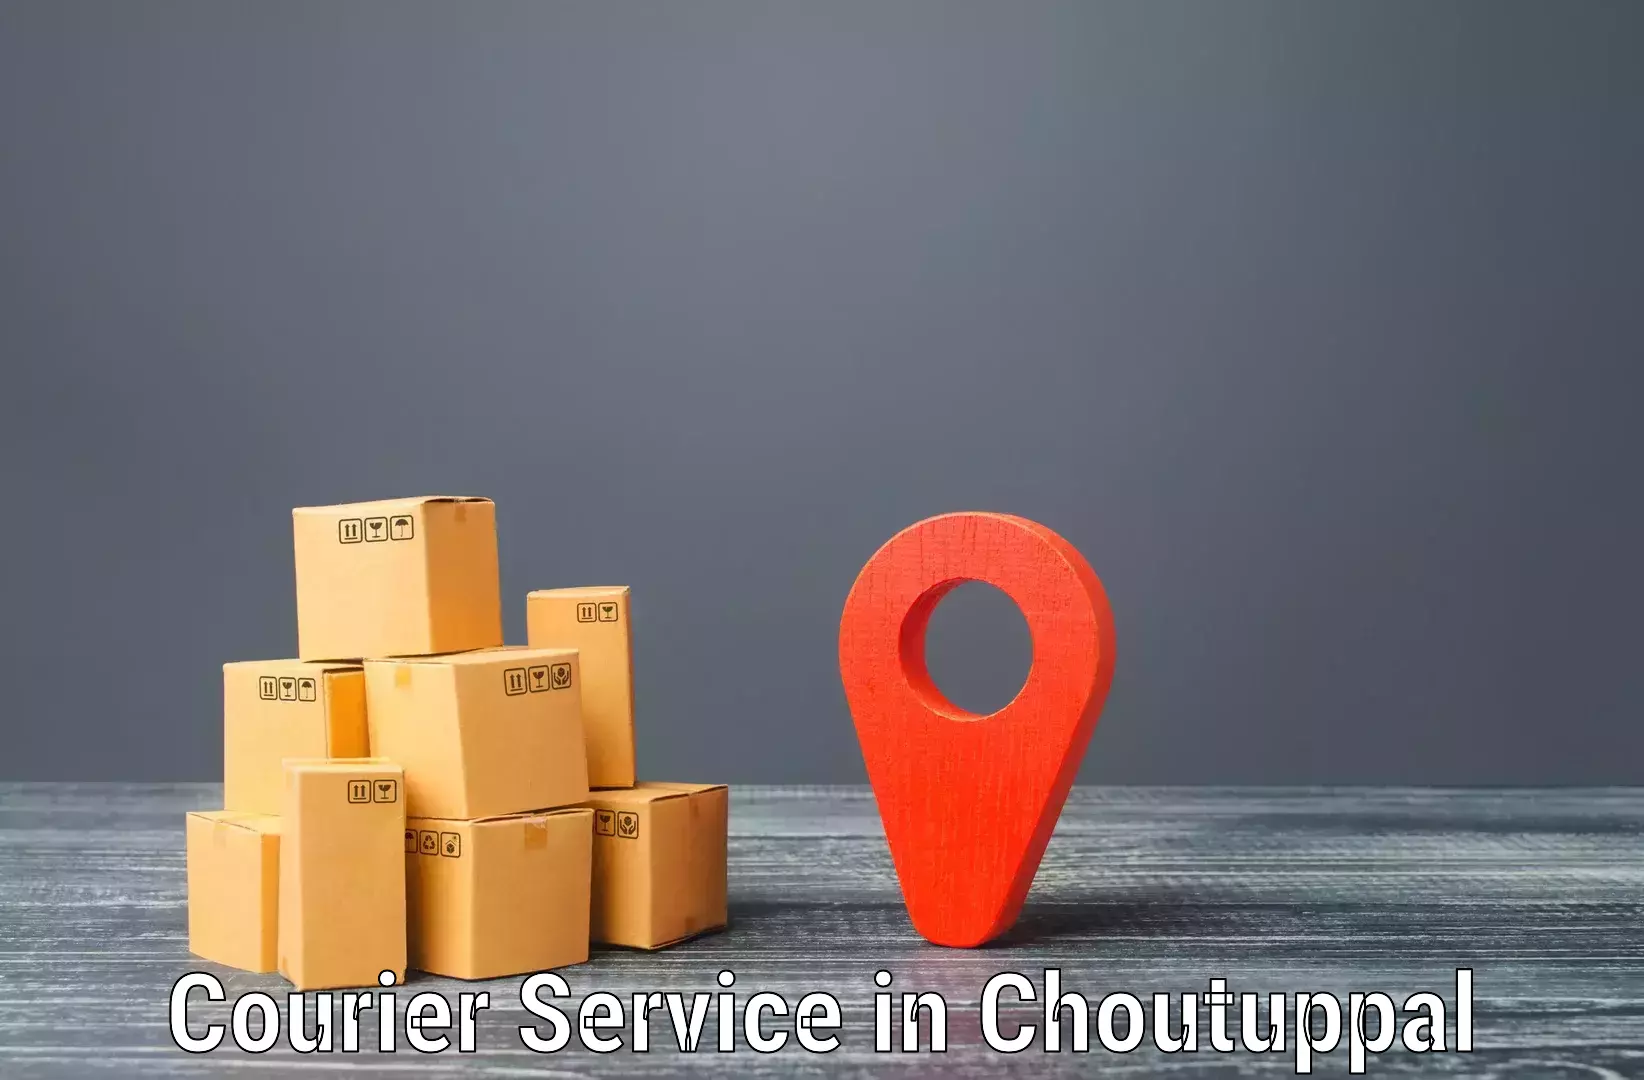 Next-generation courier services in Choutuppal